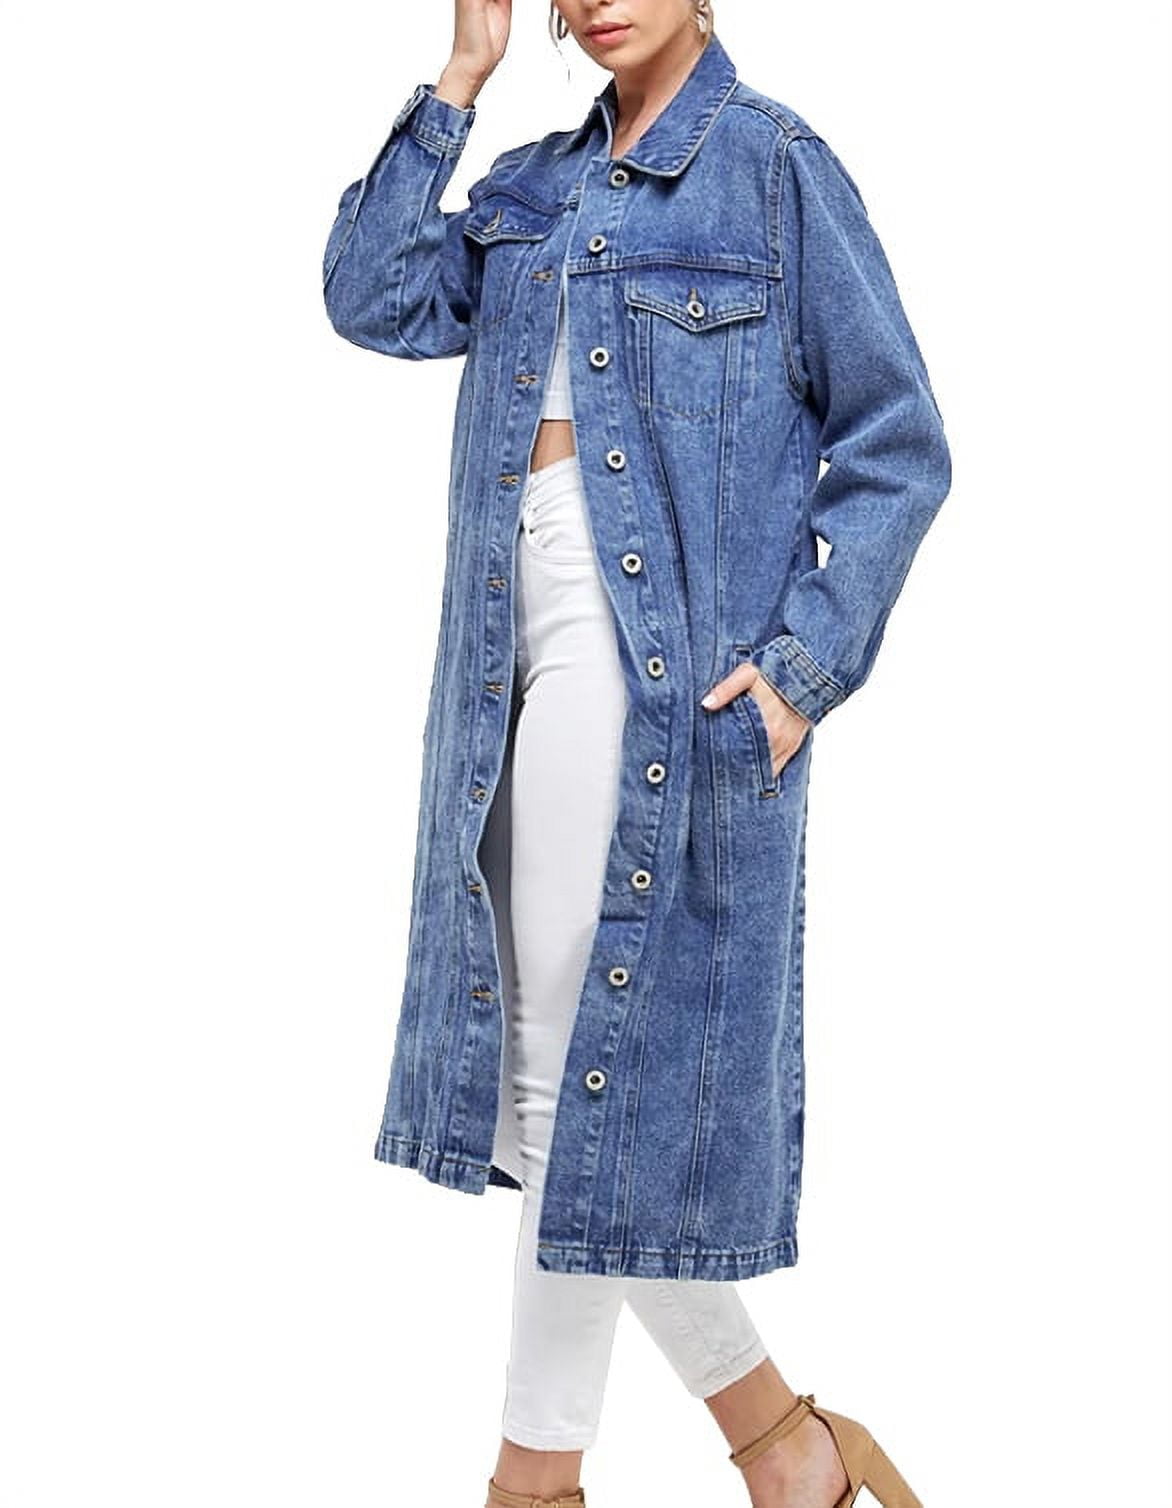 Asvivid Women's Denim Jacket Long Sleeve Washed Jean Jacket Casual Graphic Print Button Front Loose Fit Coat Outwear, Size: Large, Blue